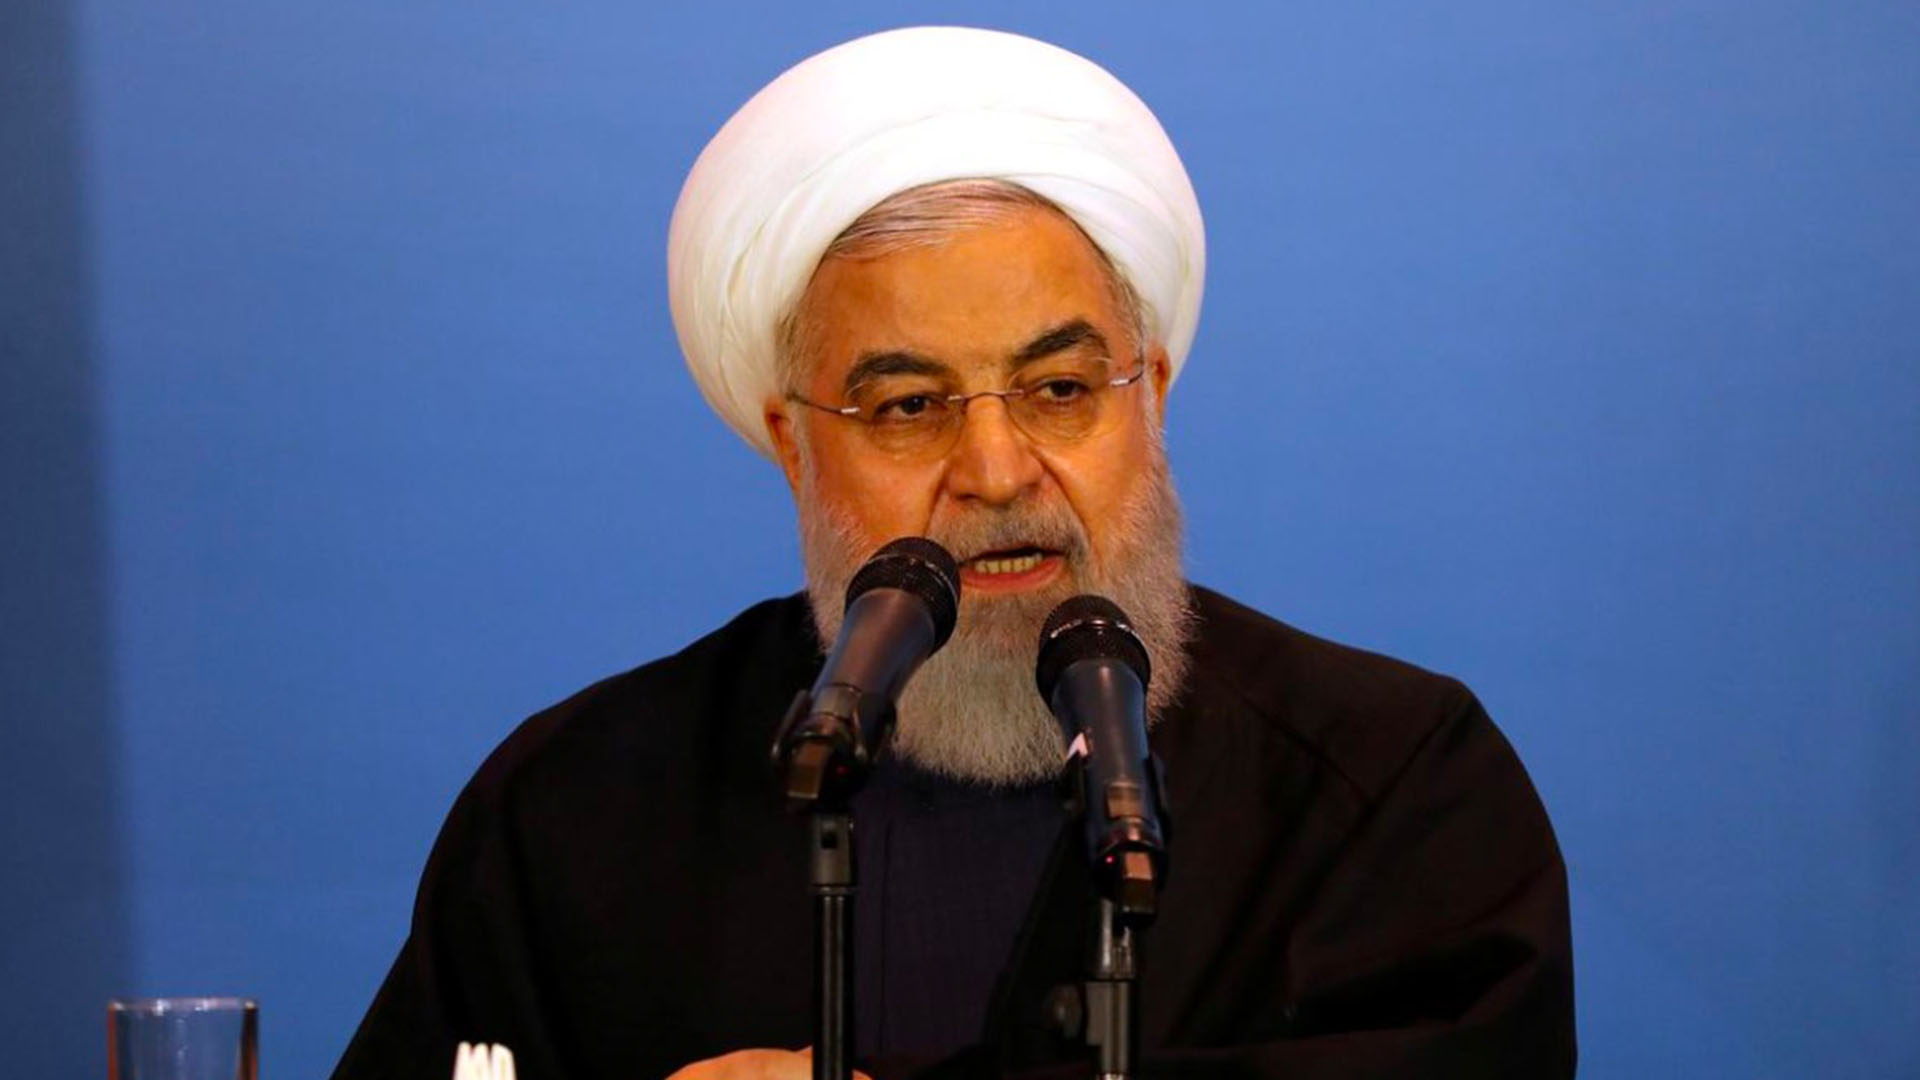 Iran says it's ready for talks if U.S. apologises over nuclear pact